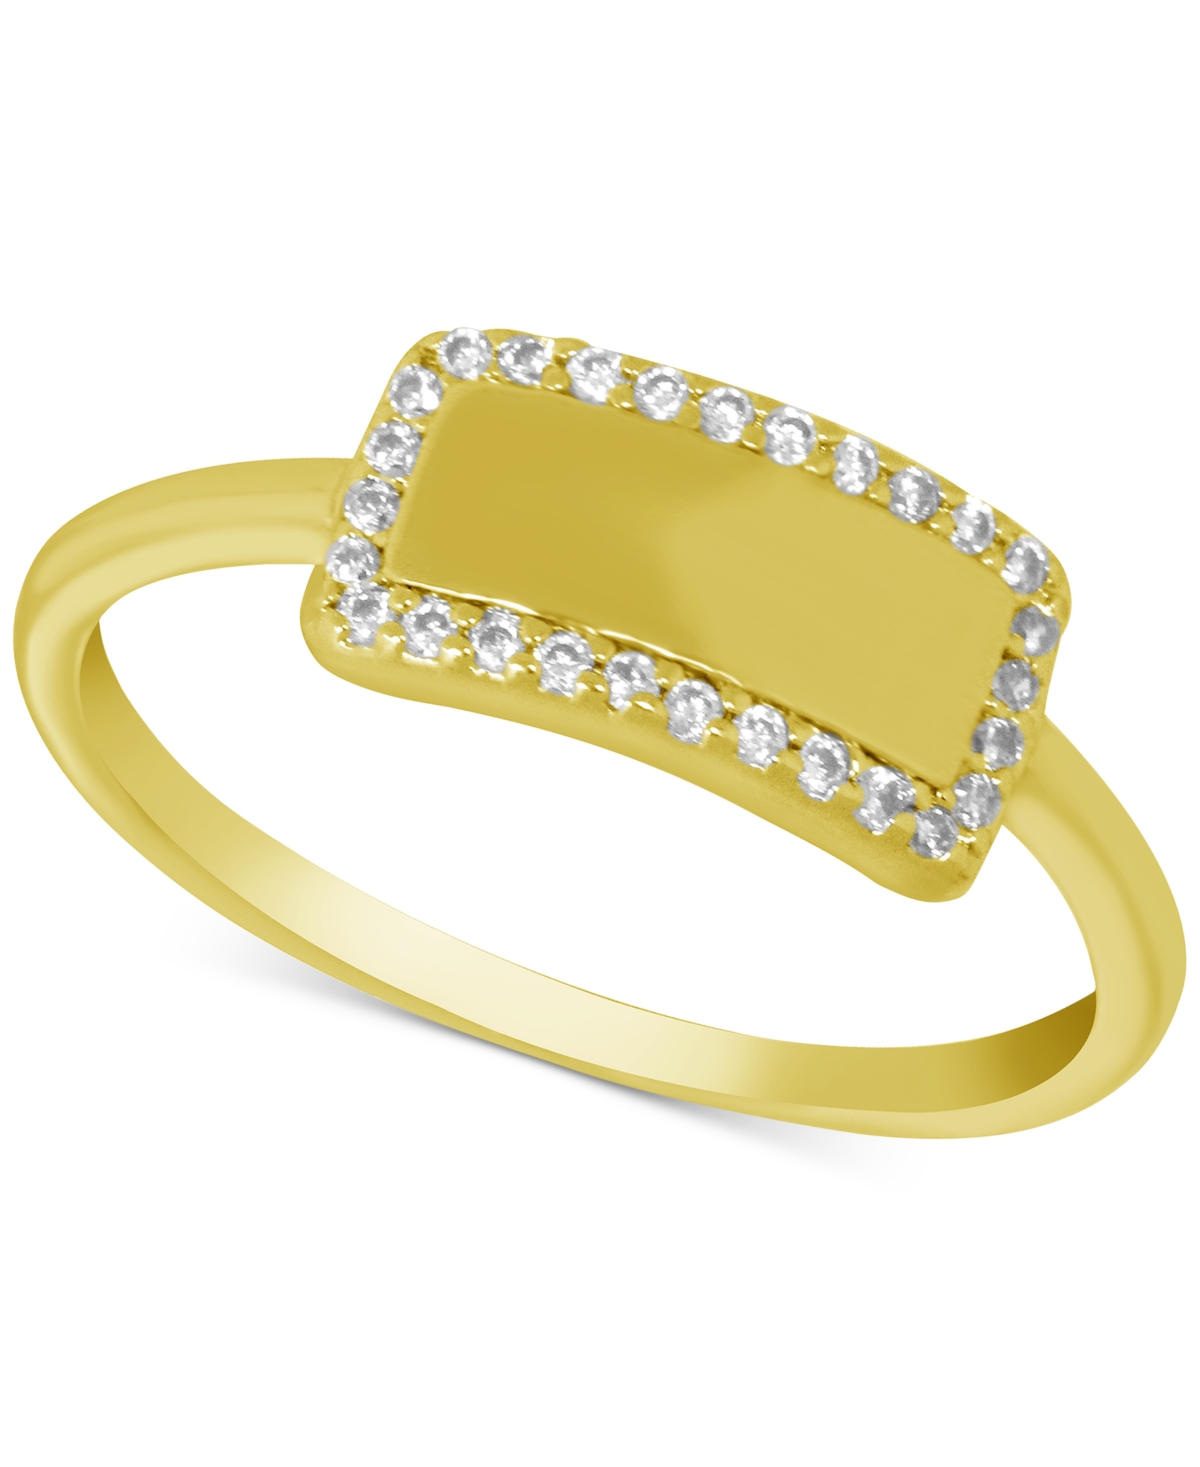 Crystal Bar Ring in Gold-Plate - Gold